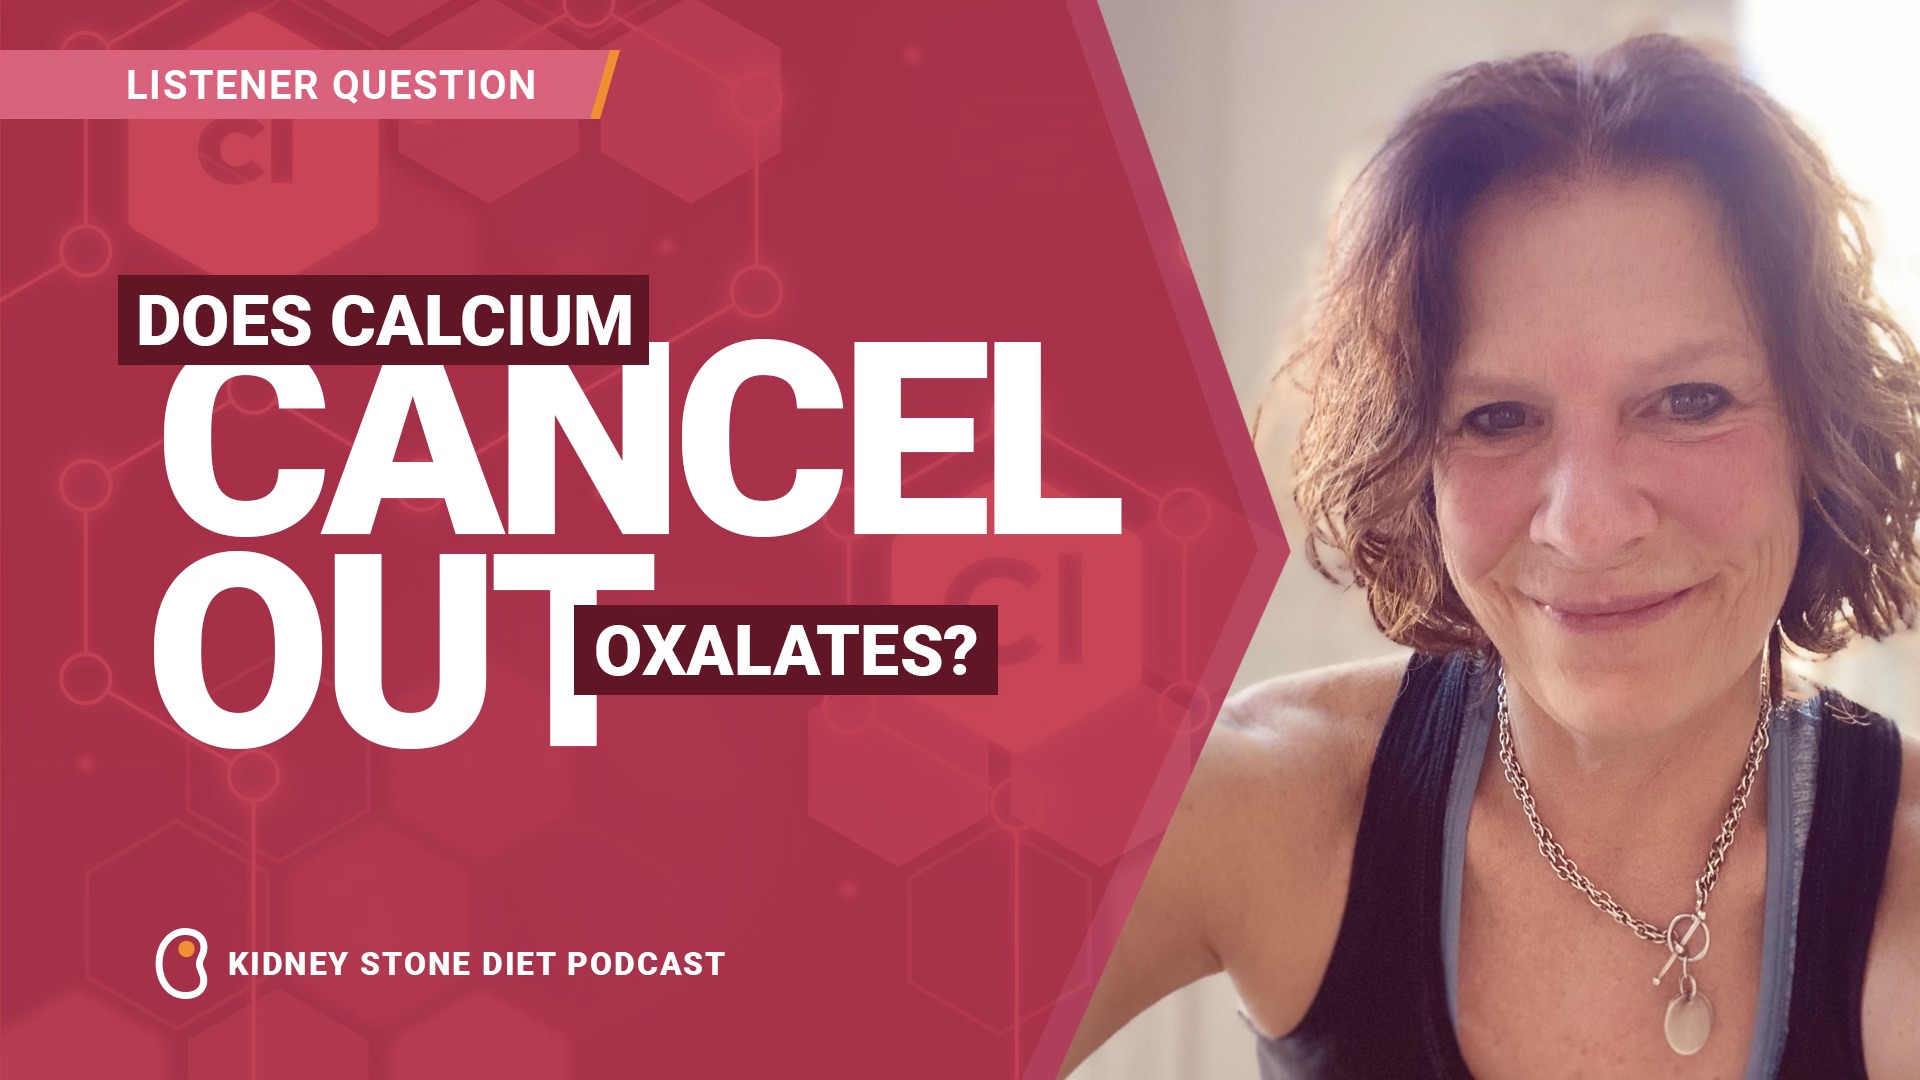 Does calcium cancel out oxalates?